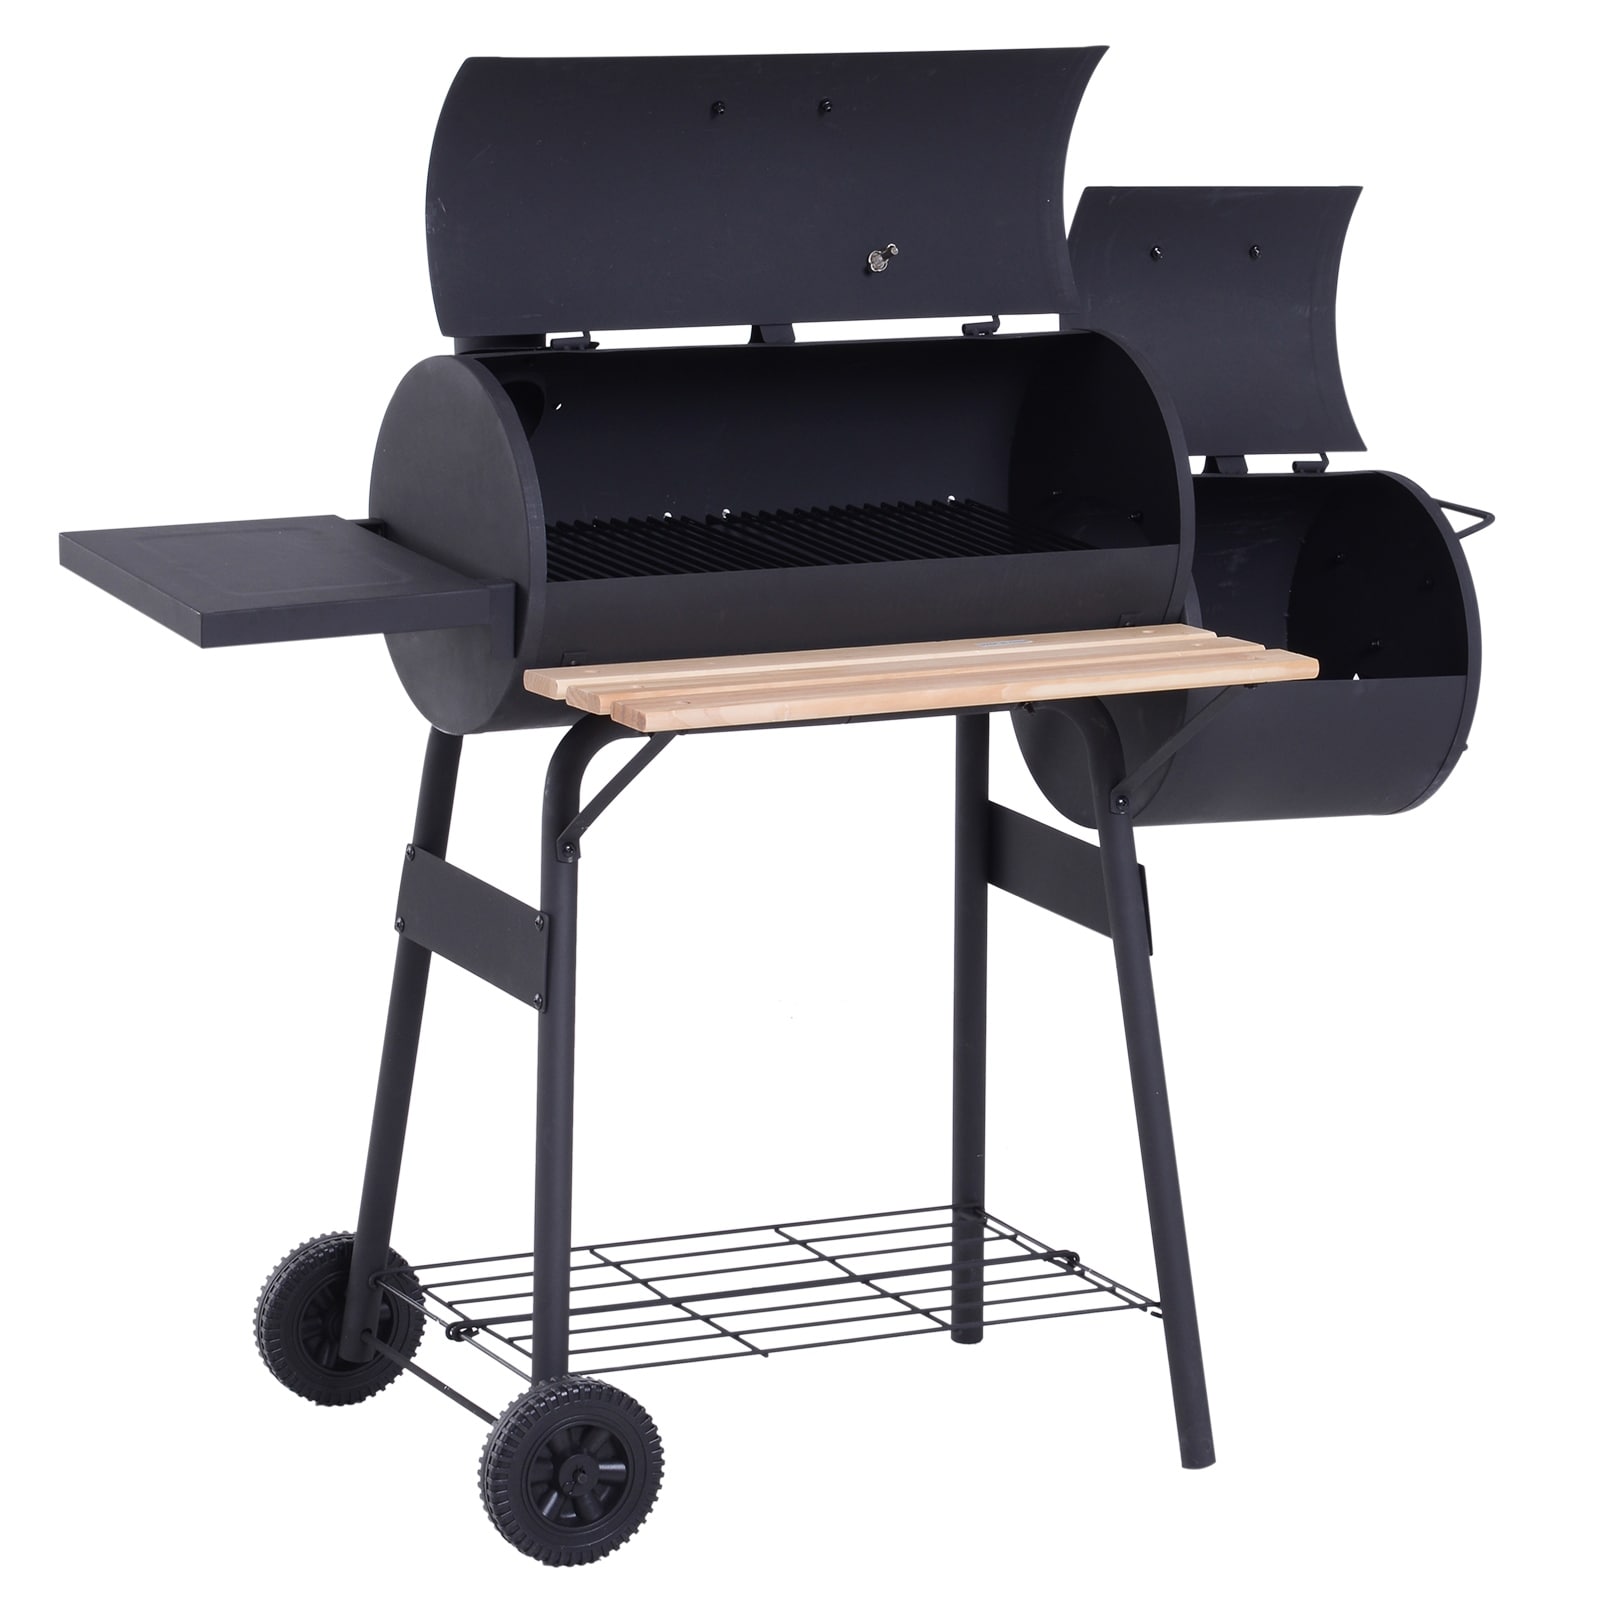 Outsunny Steel Portable Backyard Charcoal BBQ Grill and Offset